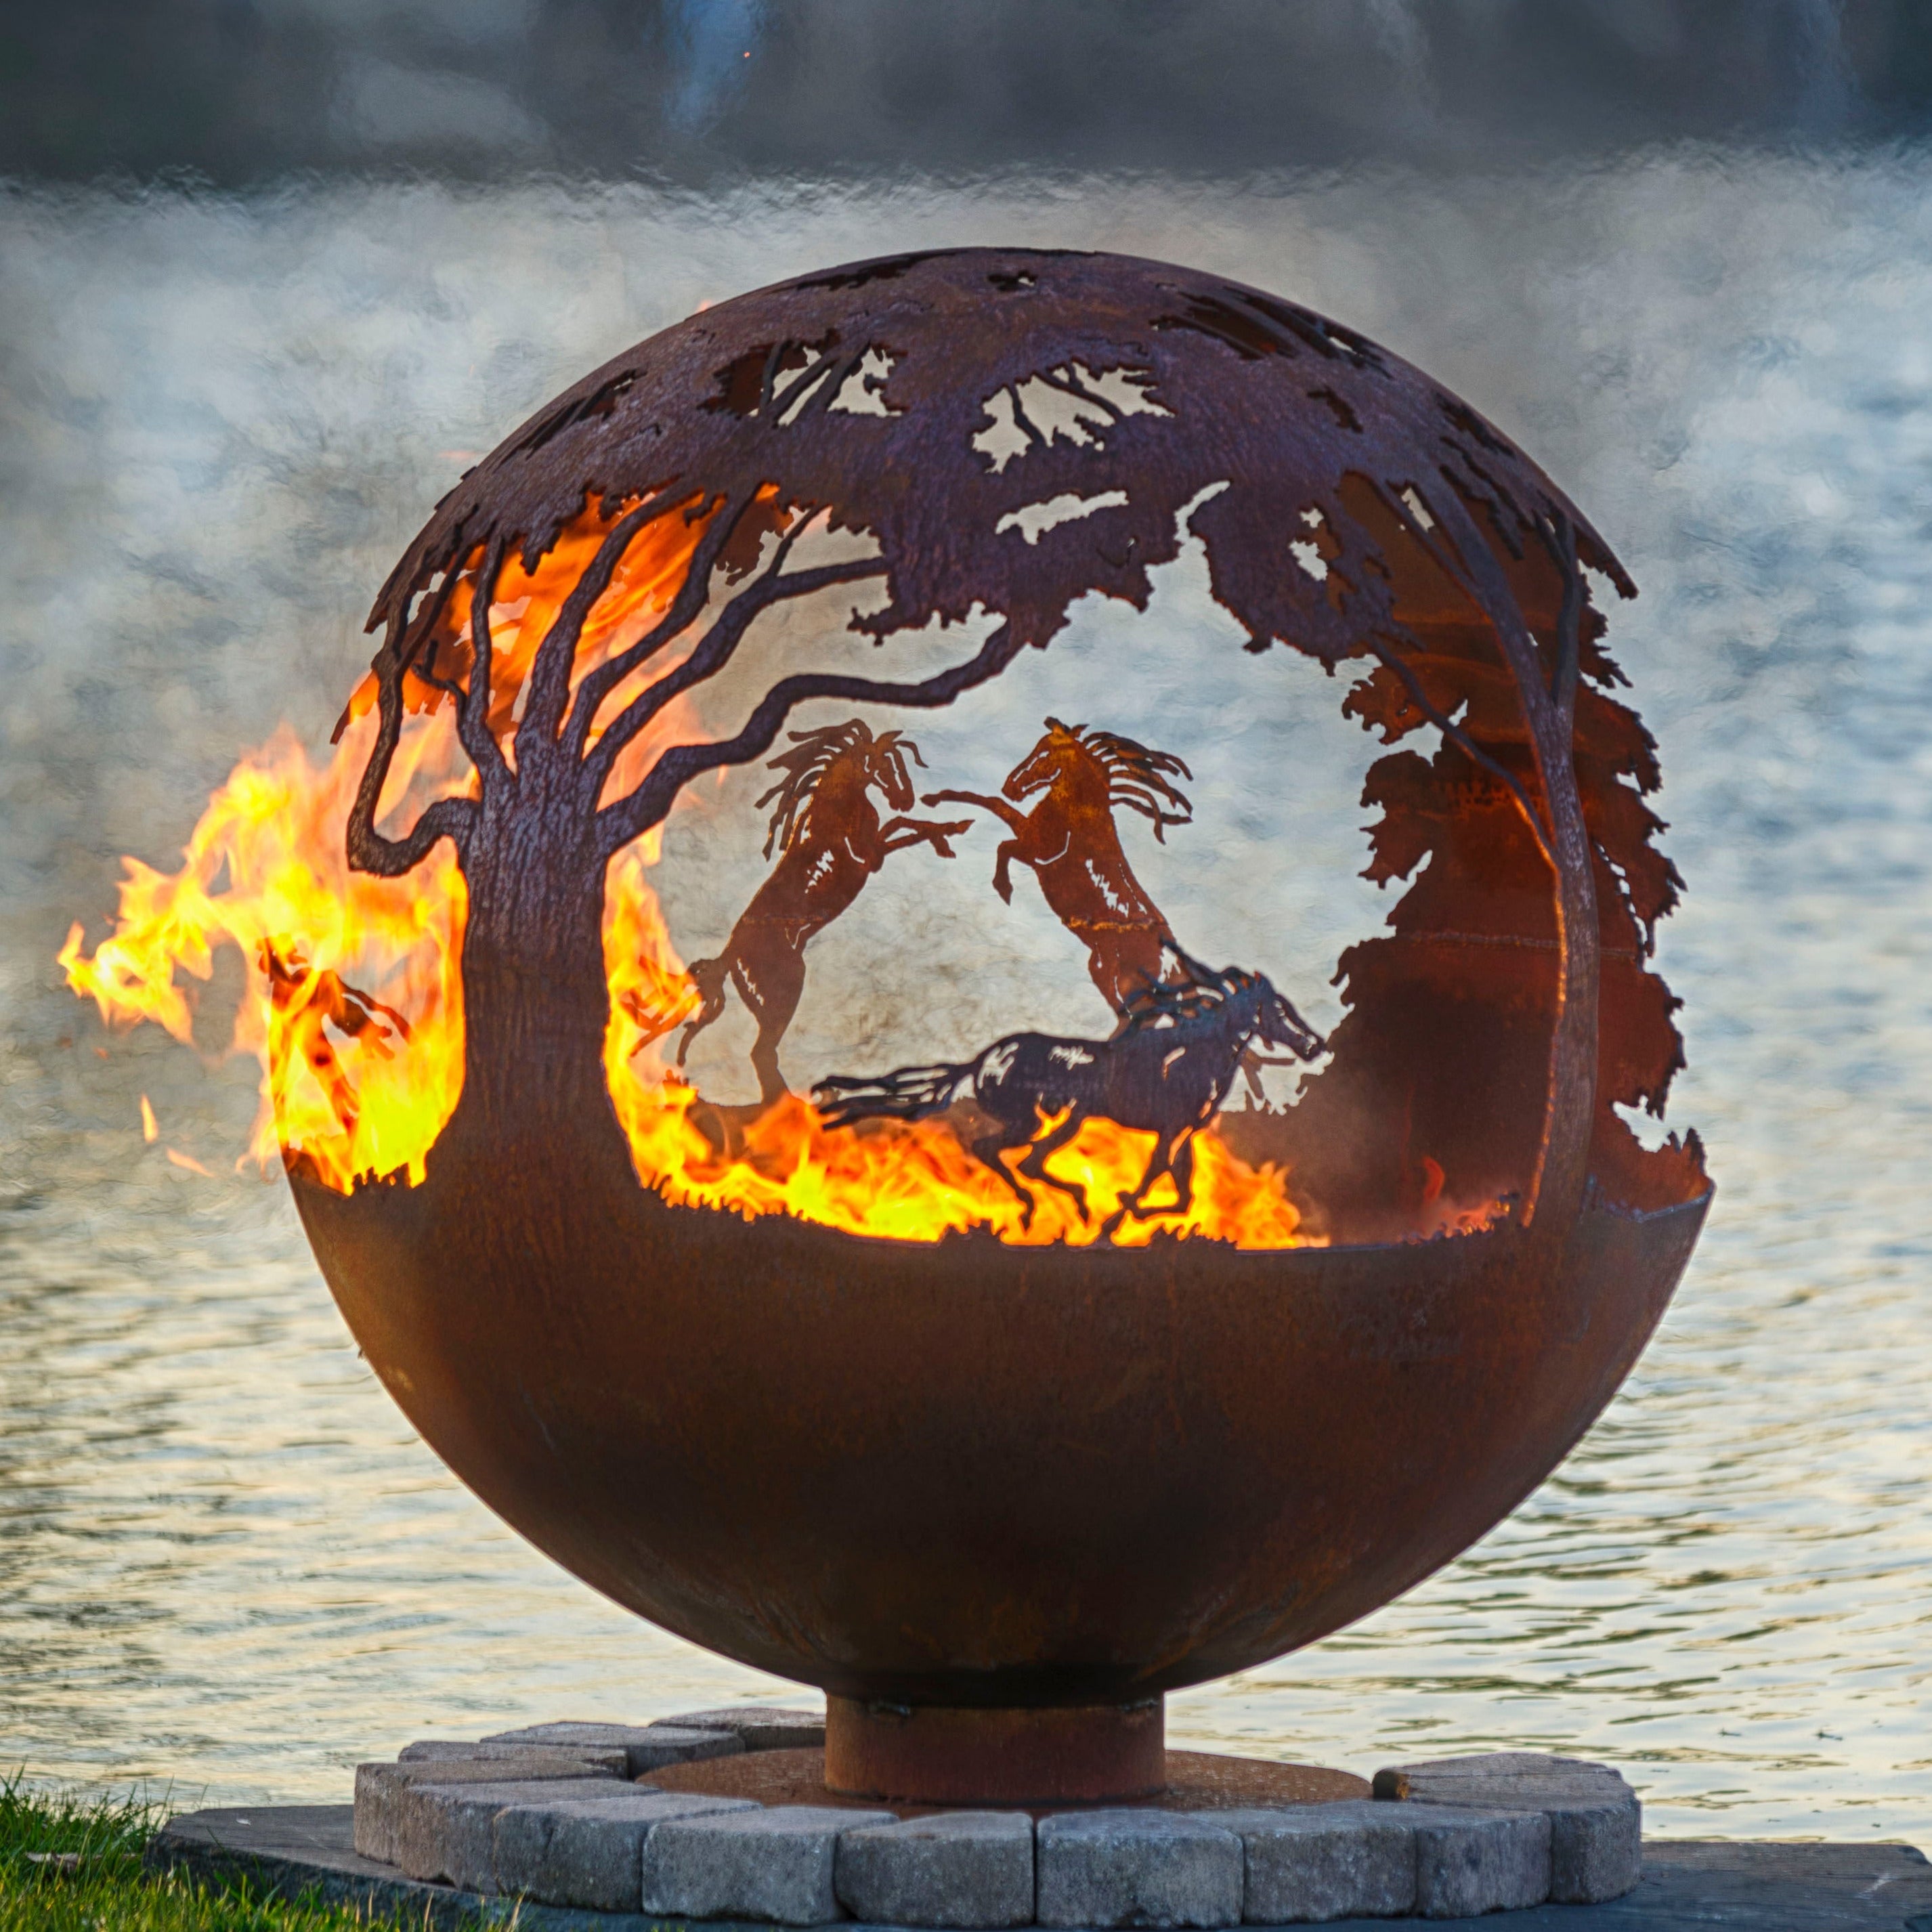 The Fire Pit Gallery Wildfire Horse Fire Pit Sphere